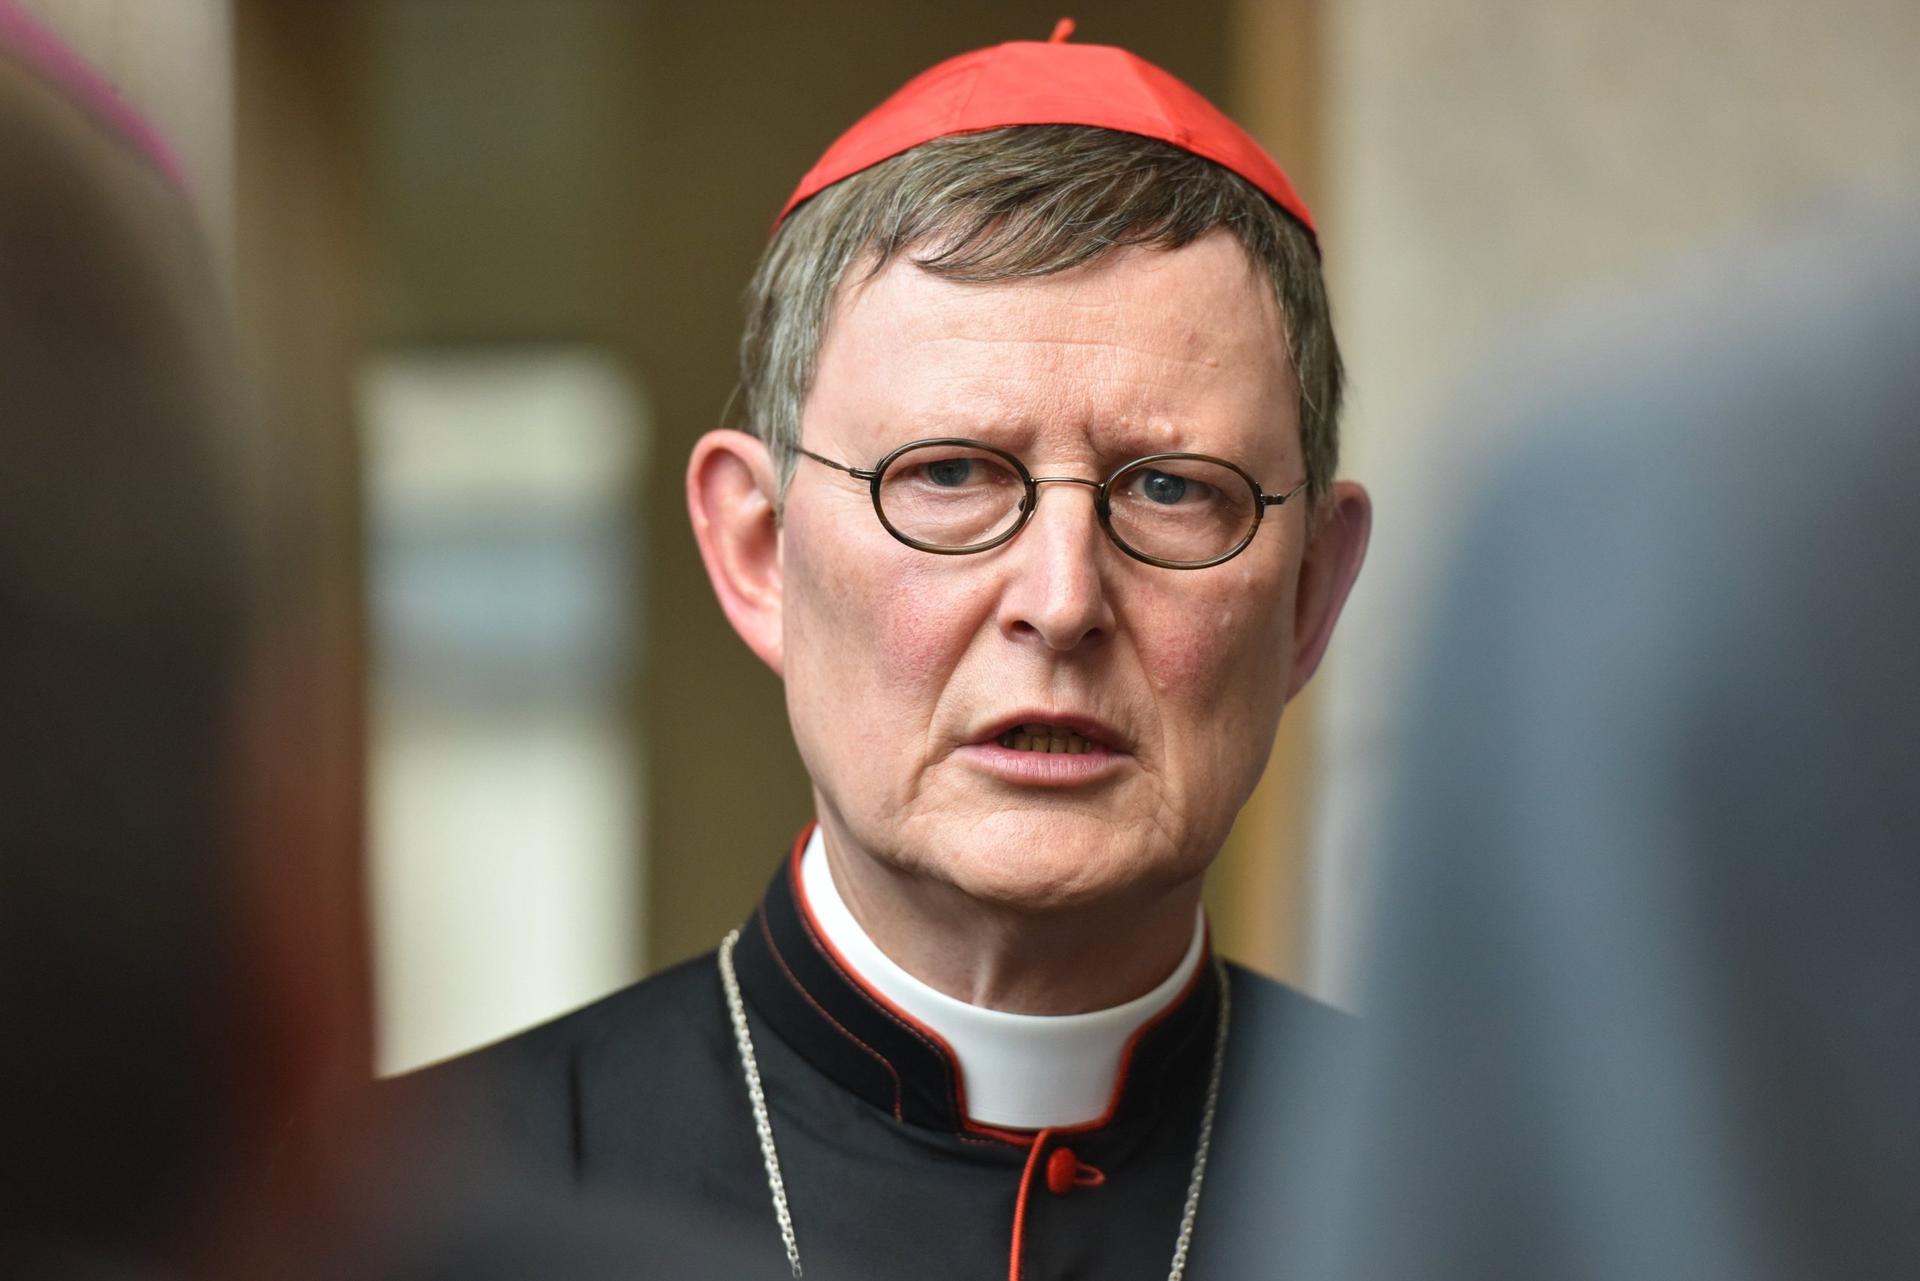 Cologne cardinal warns German church’s Synodal Path could cause schism